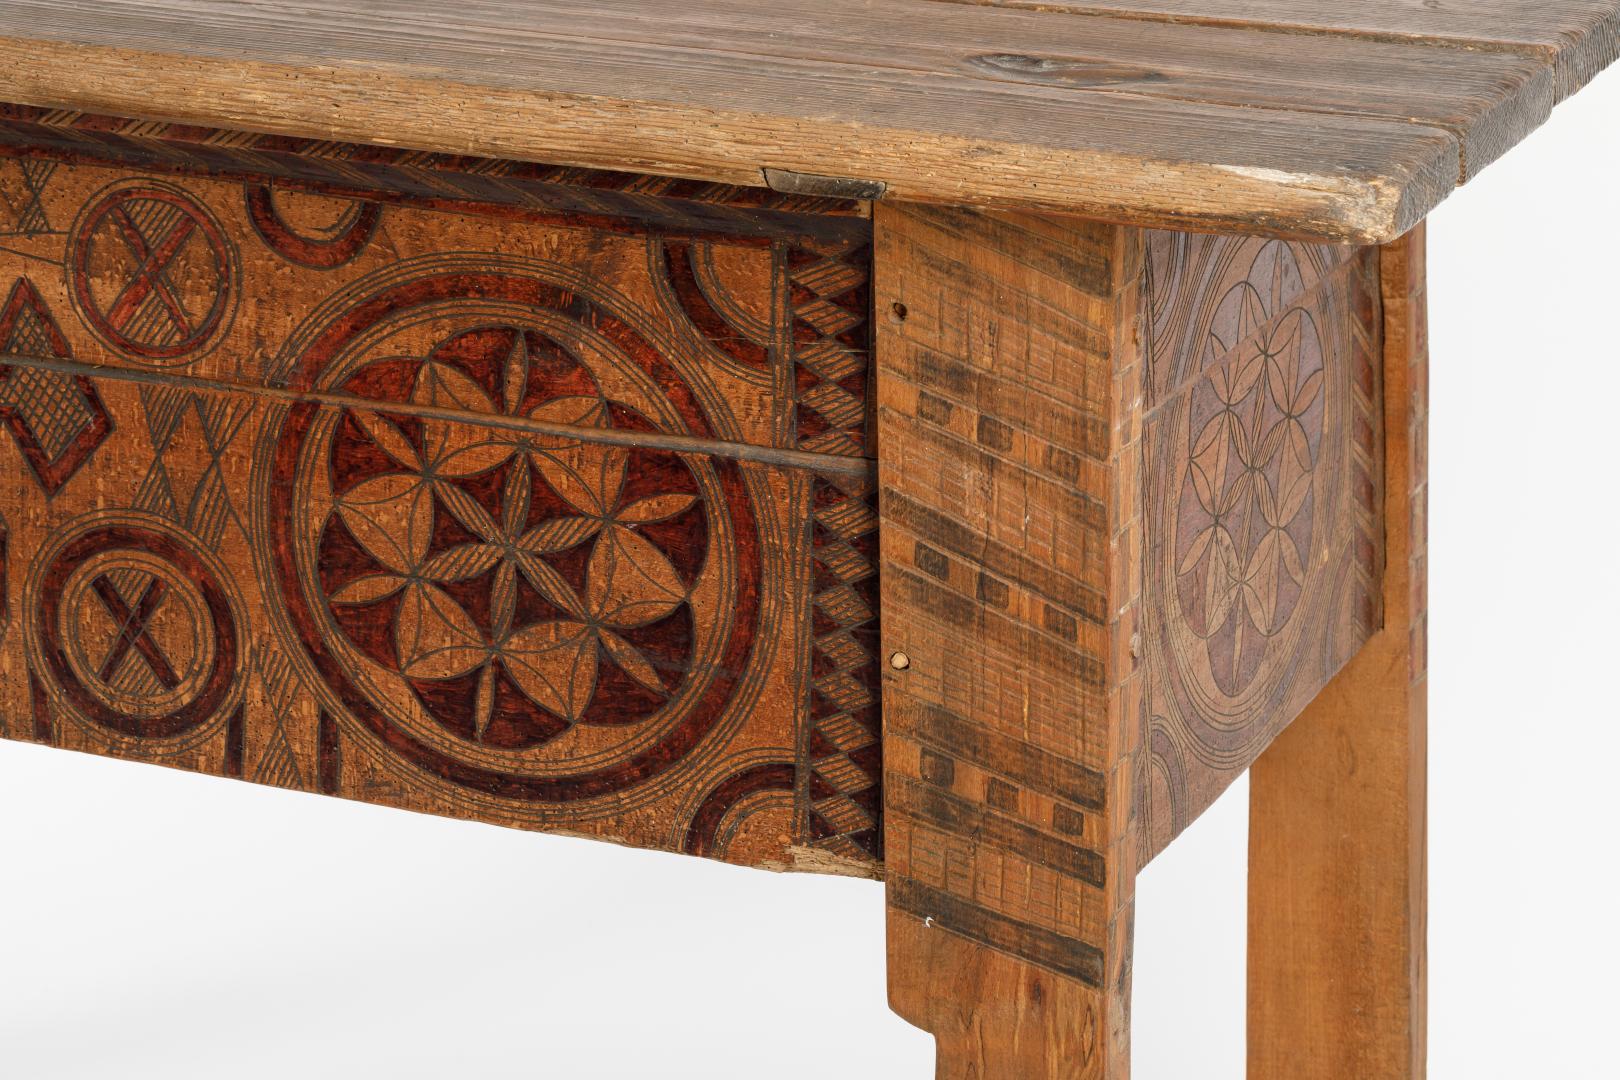 Carved chest-table